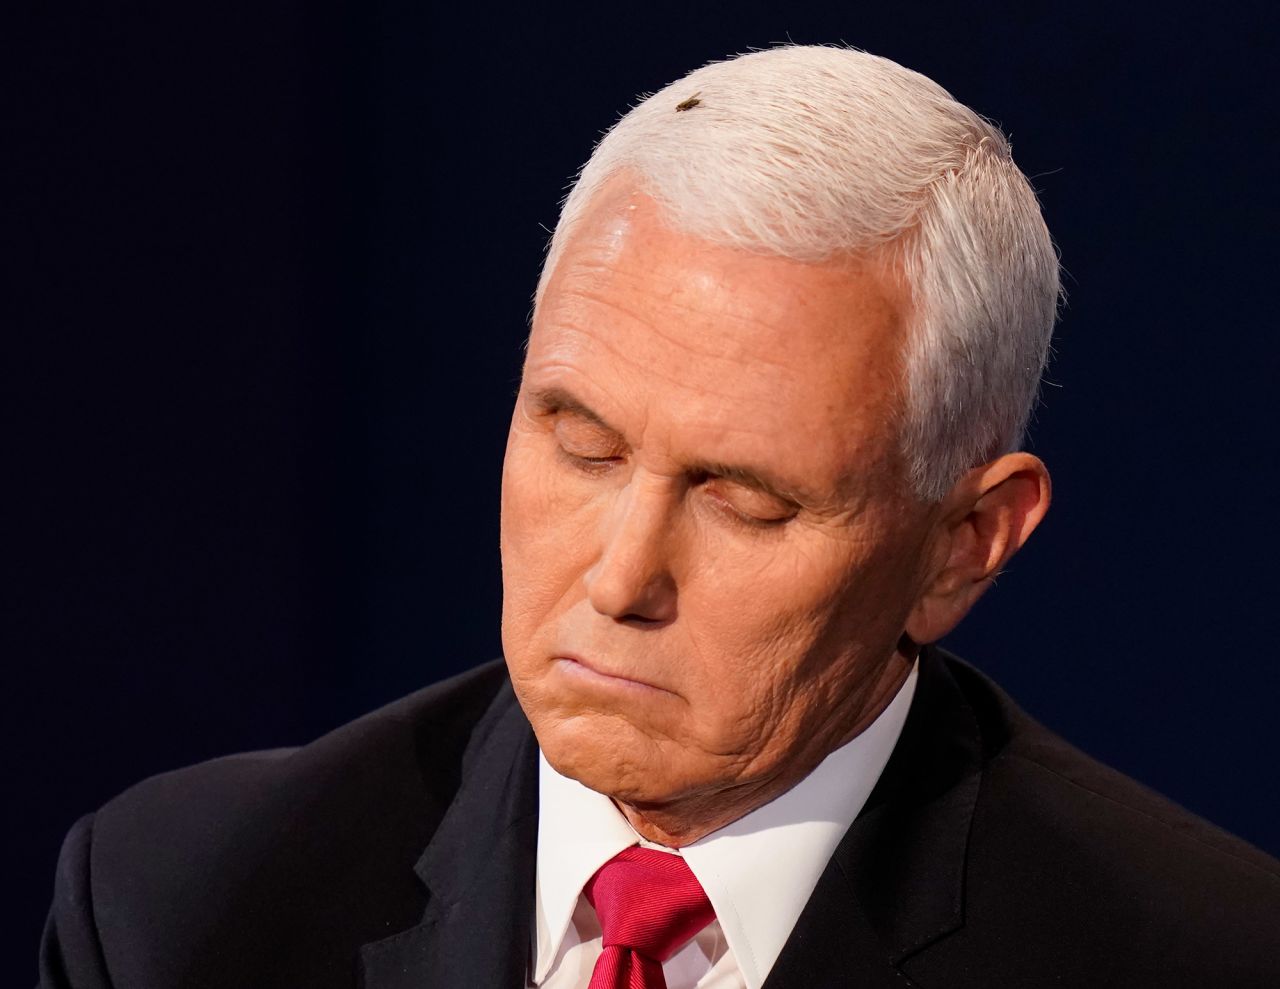 <a href="https://www.cnn.com/videos/politics/2020/10/08/mike-pence-fly-on-head-debate-sot-vpx.cnn" target="_blank">A fly sits on Pence's head</a> during the debate. It became <a href="https://www.cnn.com/politics/live-news/vp-debate-coverage-fact-check-10-07-20/h_6c072e0ba98c2c5ca7c1ae17076a5d41" target="_blank">a trending moment</a> on social media.